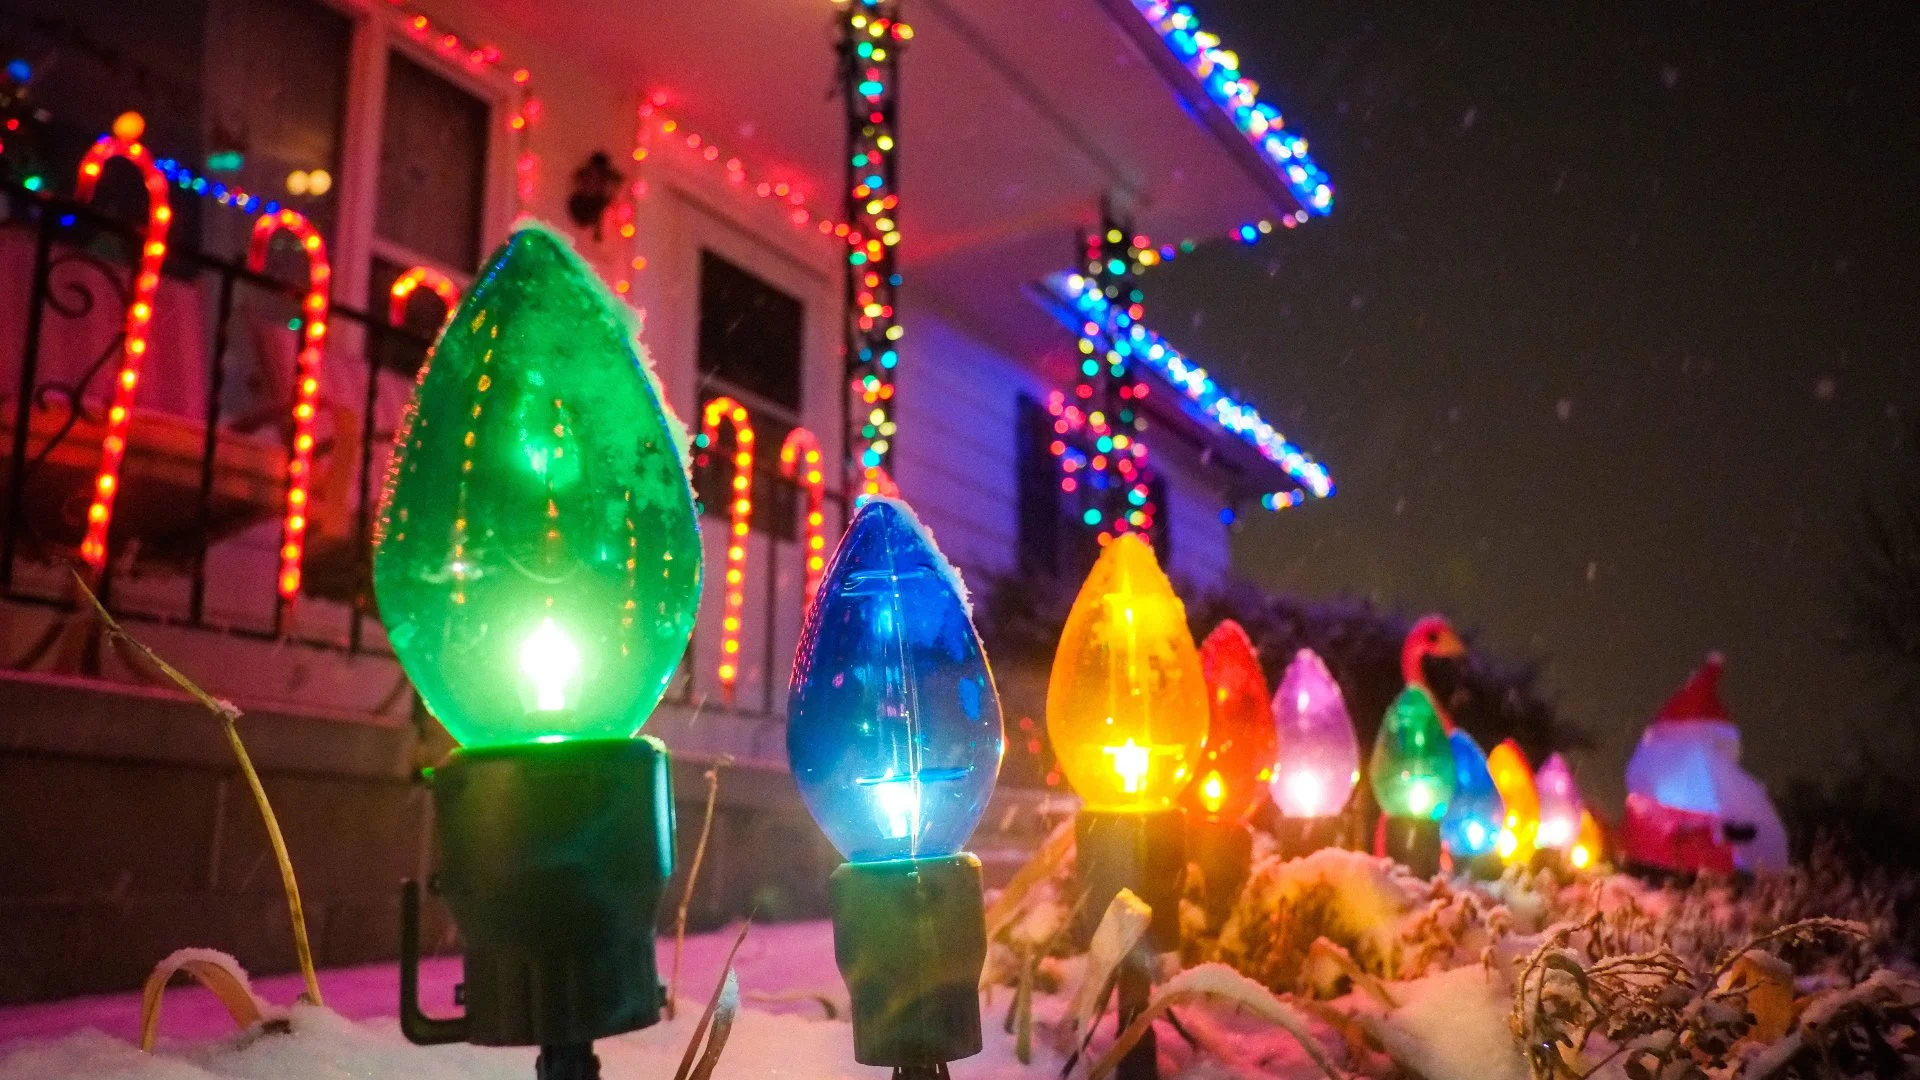 Schedule a Christmas Light Installation Service as Early as You Can!